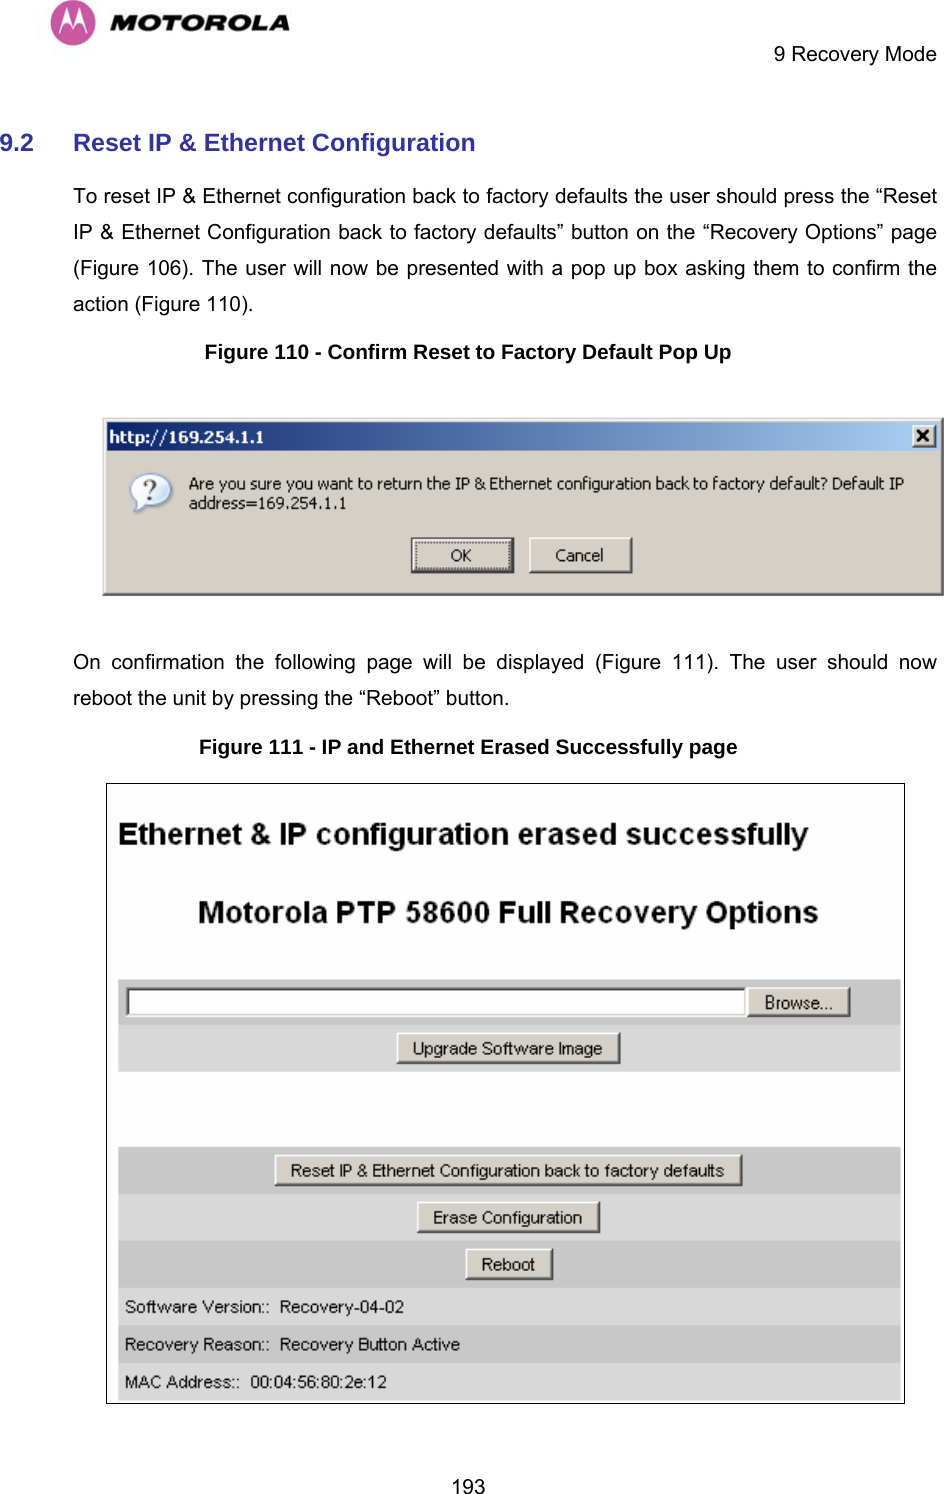     9 Recovery Mode  1939.2  Reset IP &amp; Ethernet Configuration To reset IP &amp; Ethernet configuration back to factory defaults the user should press the “Reset IP &amp; Ethernet Configuration back to factory defaults” button on the “Recovery Options” page (1Figure 106). The user will now be presented with a pop up box asking them to confirm the action (Figure 110). Figure 110 - Confirm Reset to Factory Default Pop Up  On confirmation the following page will be displayed (Figure 111). The user should now reboot the unit by pressing the “Reboot” button. Figure 111 - IP and Ethernet Erased Successfully page  